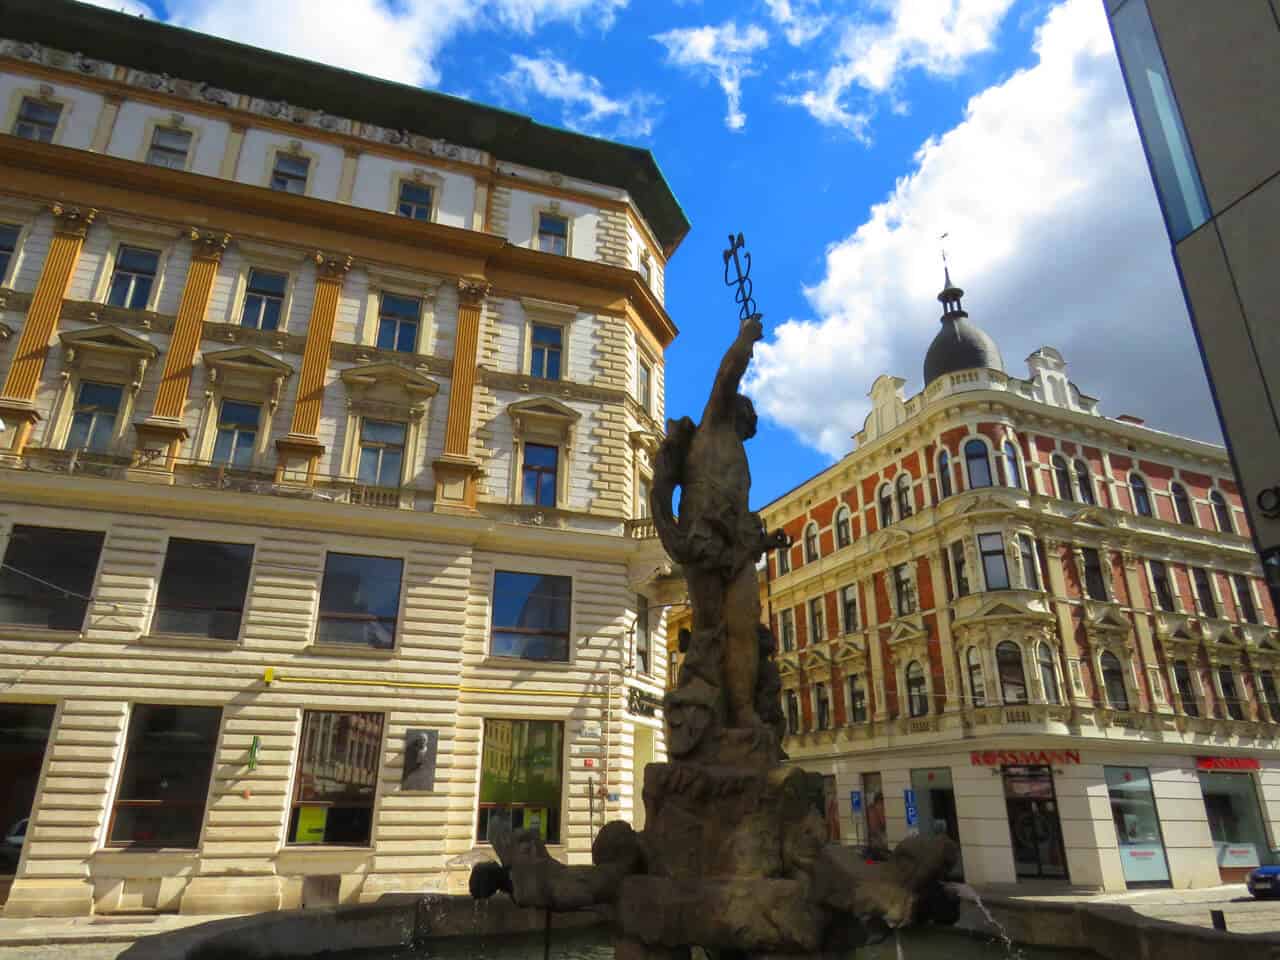  fountain and buildings on the main square, Olomouc